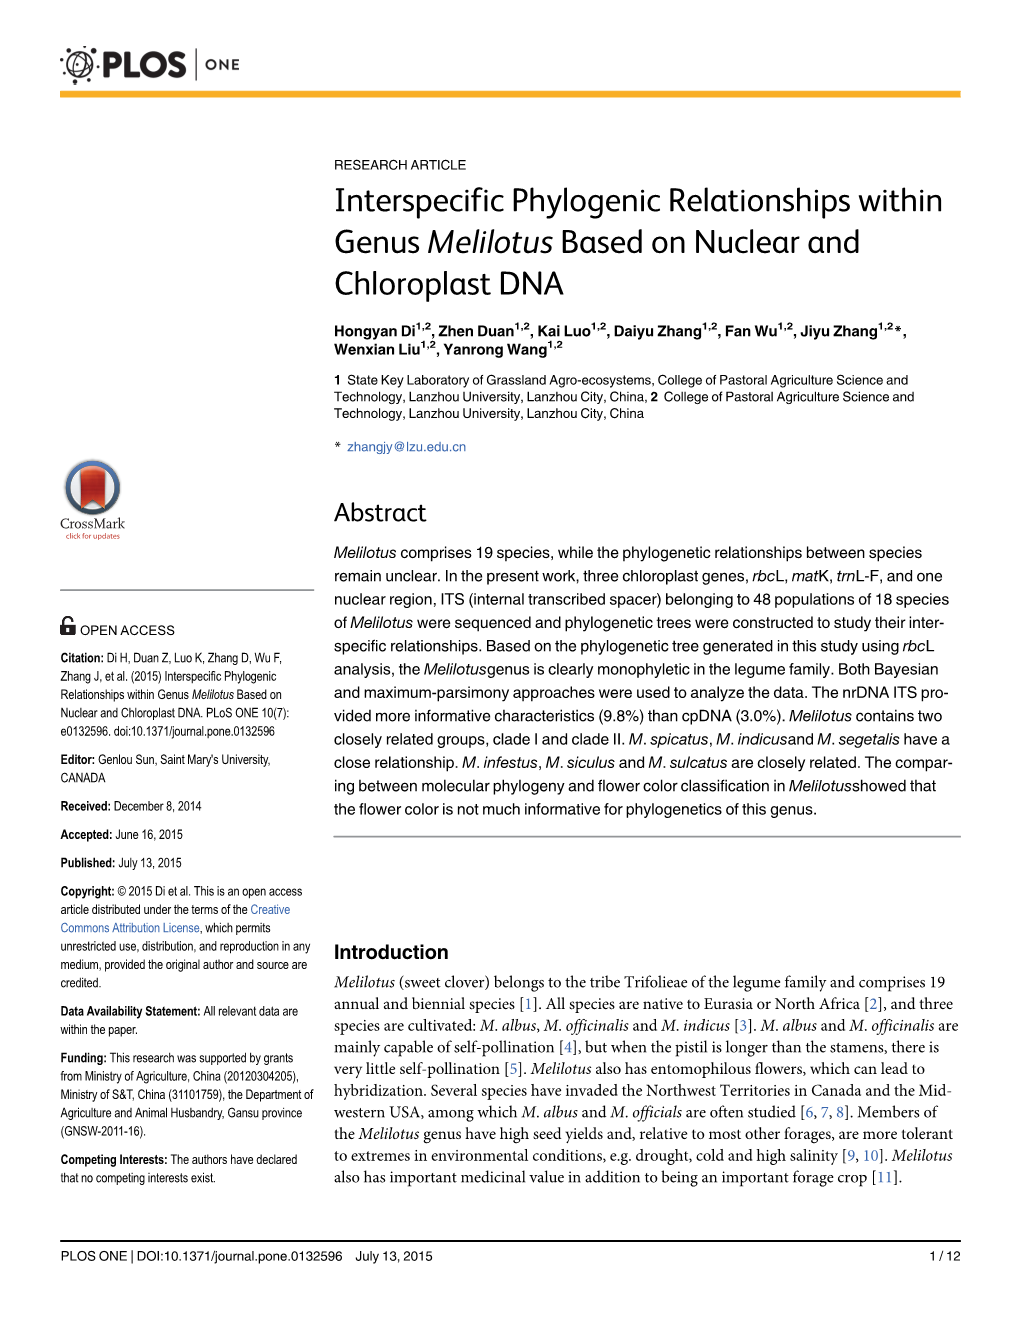 Interspecific Phylogenic Relationships Within Genus Melilotus Based on Nuclear and Chloroplast DNA